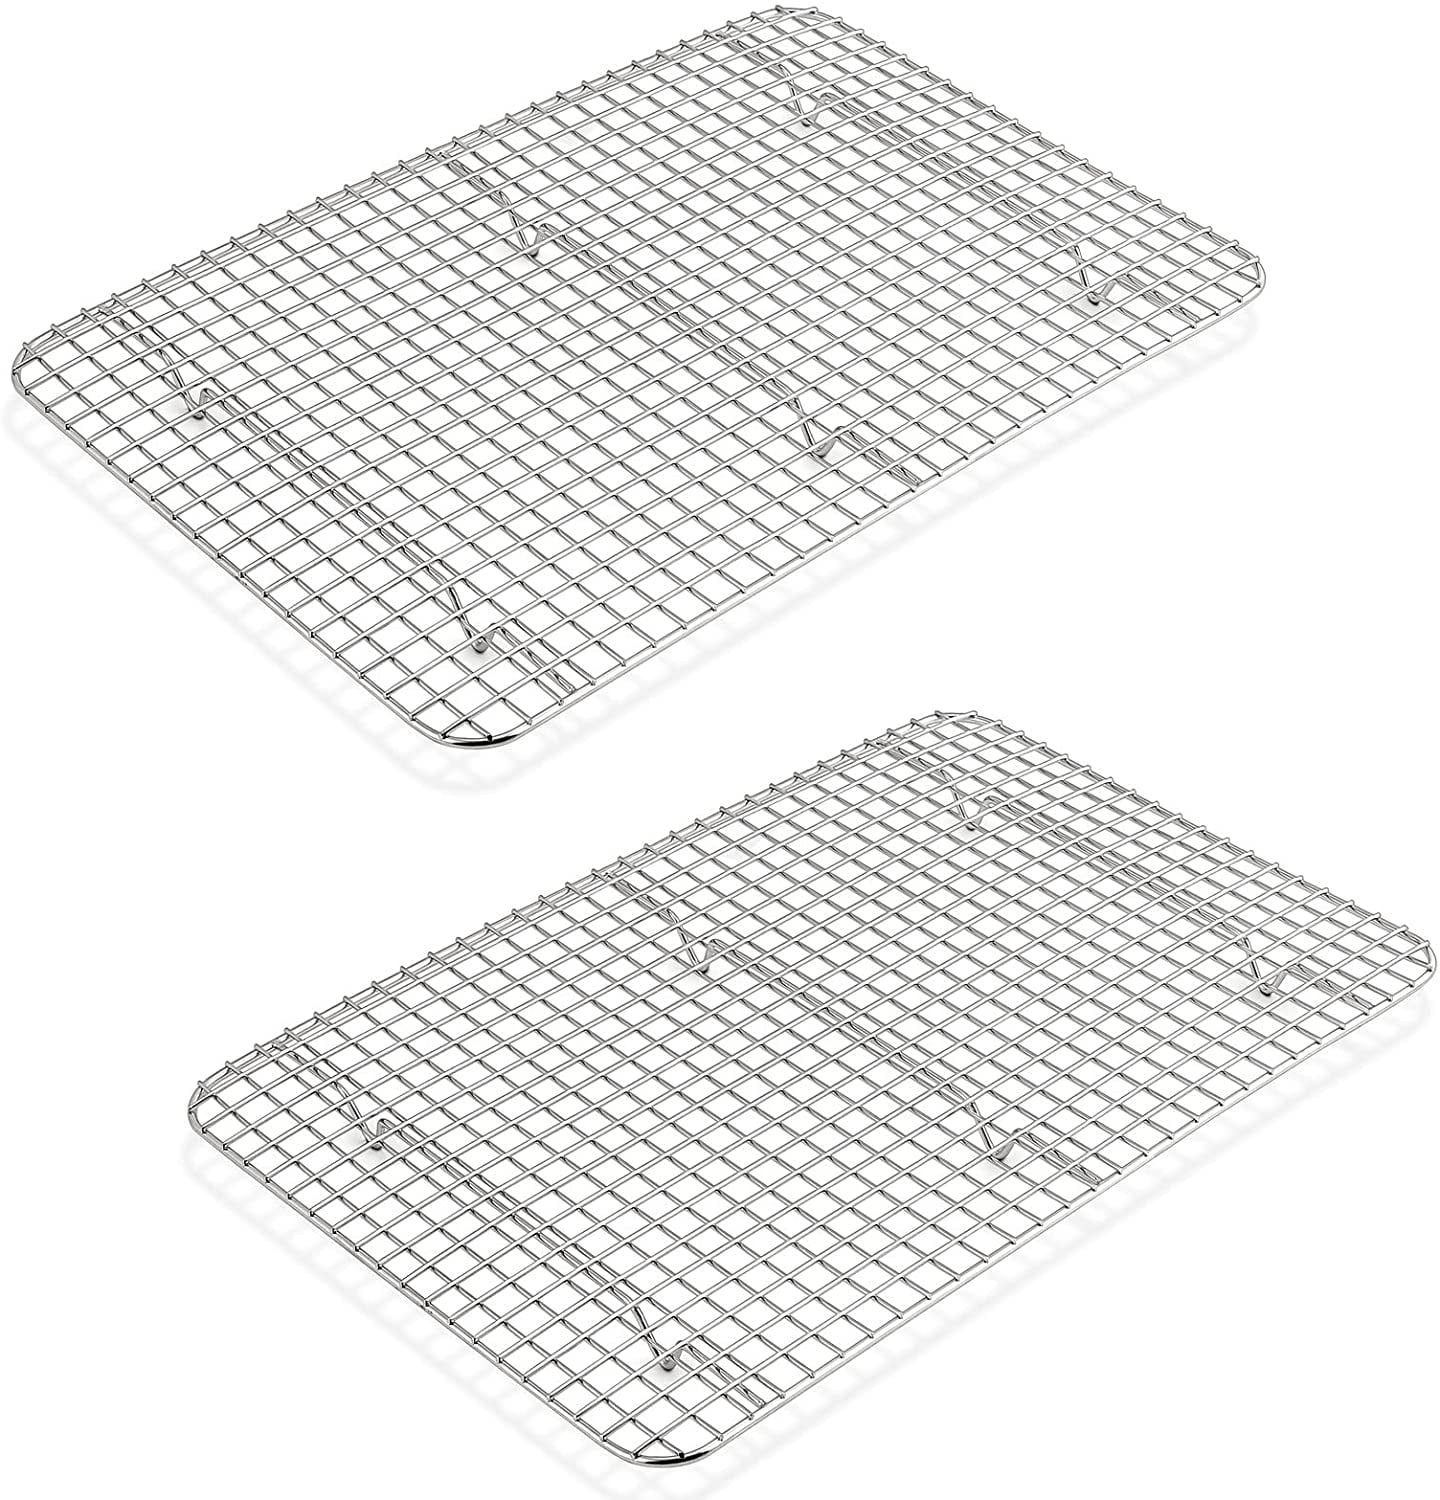 Cooling Rack Stainless Steel Baking Rack Rectangular Wire Grids, Oven Safe,  Fits 2620cm Toaster Oven Sheet Pan Perfect for Cooking Baking Roasting